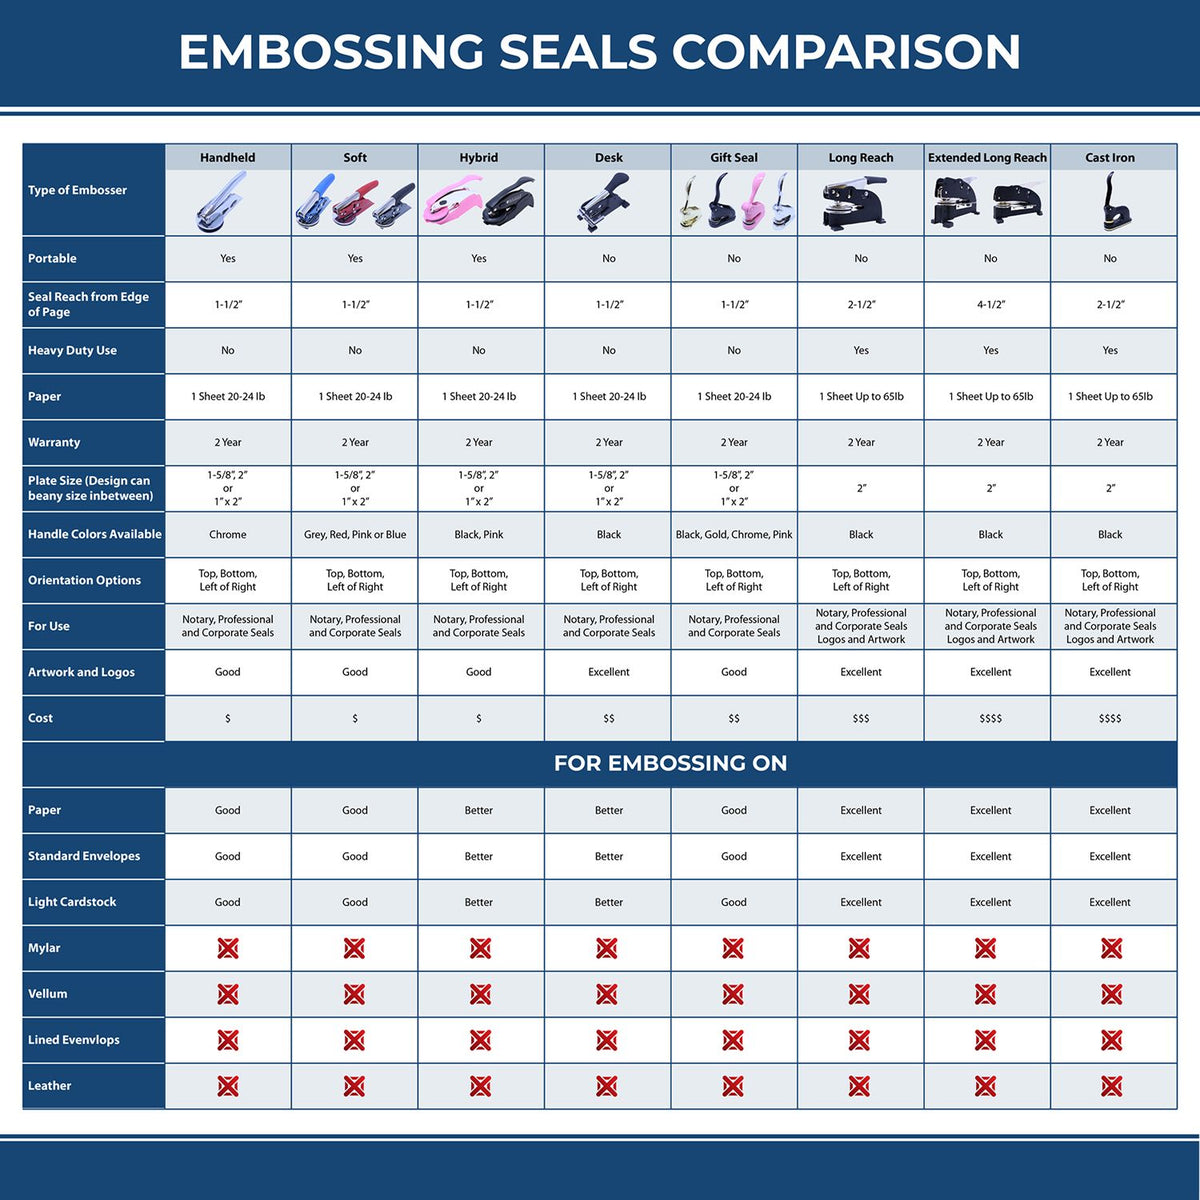 A comparison chart for the different types of mount models available for the Soft Iowa Professional Geologist Seal